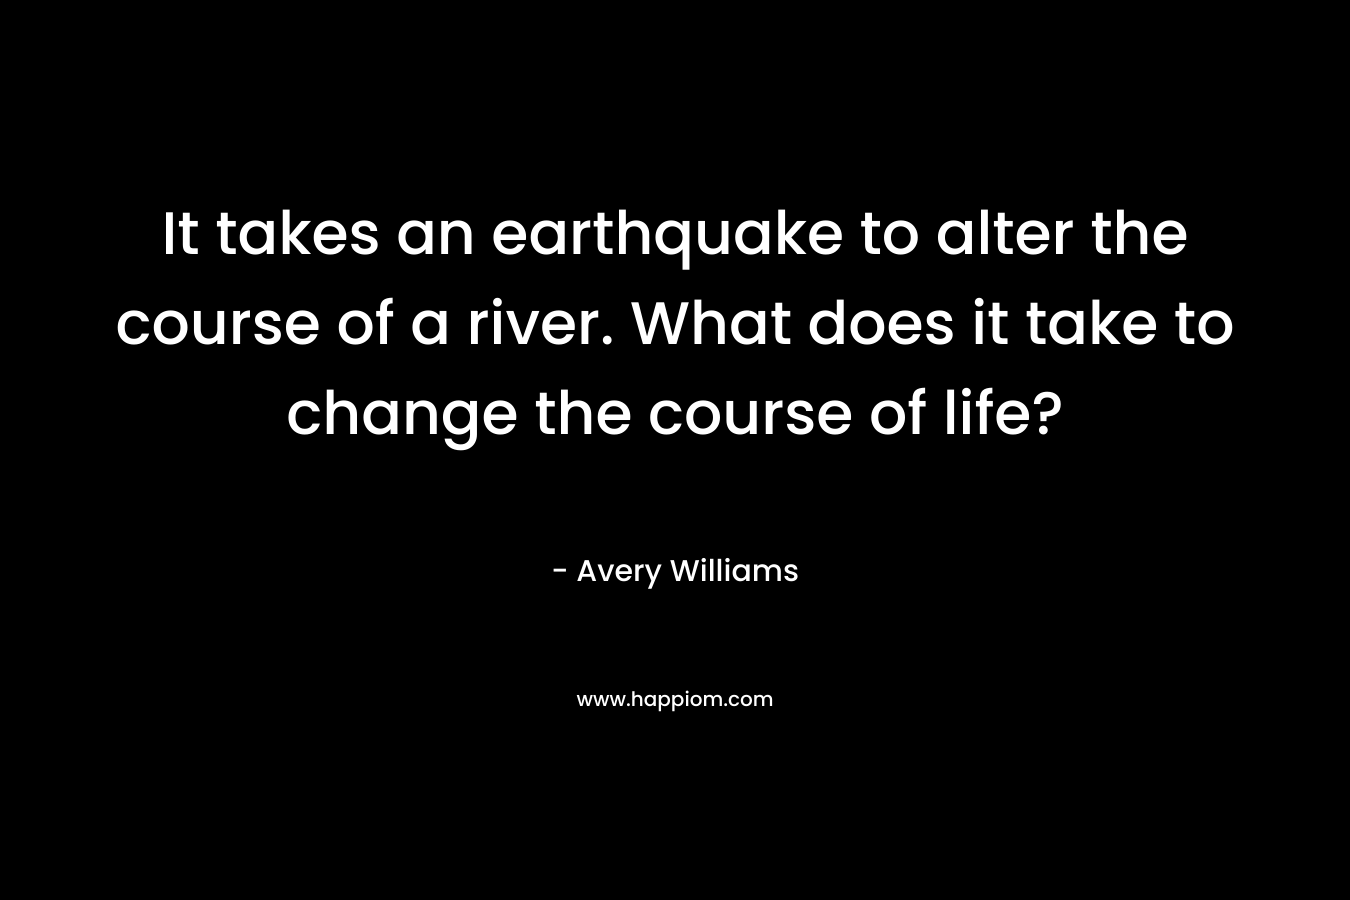 It takes an earthquake to alter the course of a river. What does it take to change the course of life? – Avery Williams